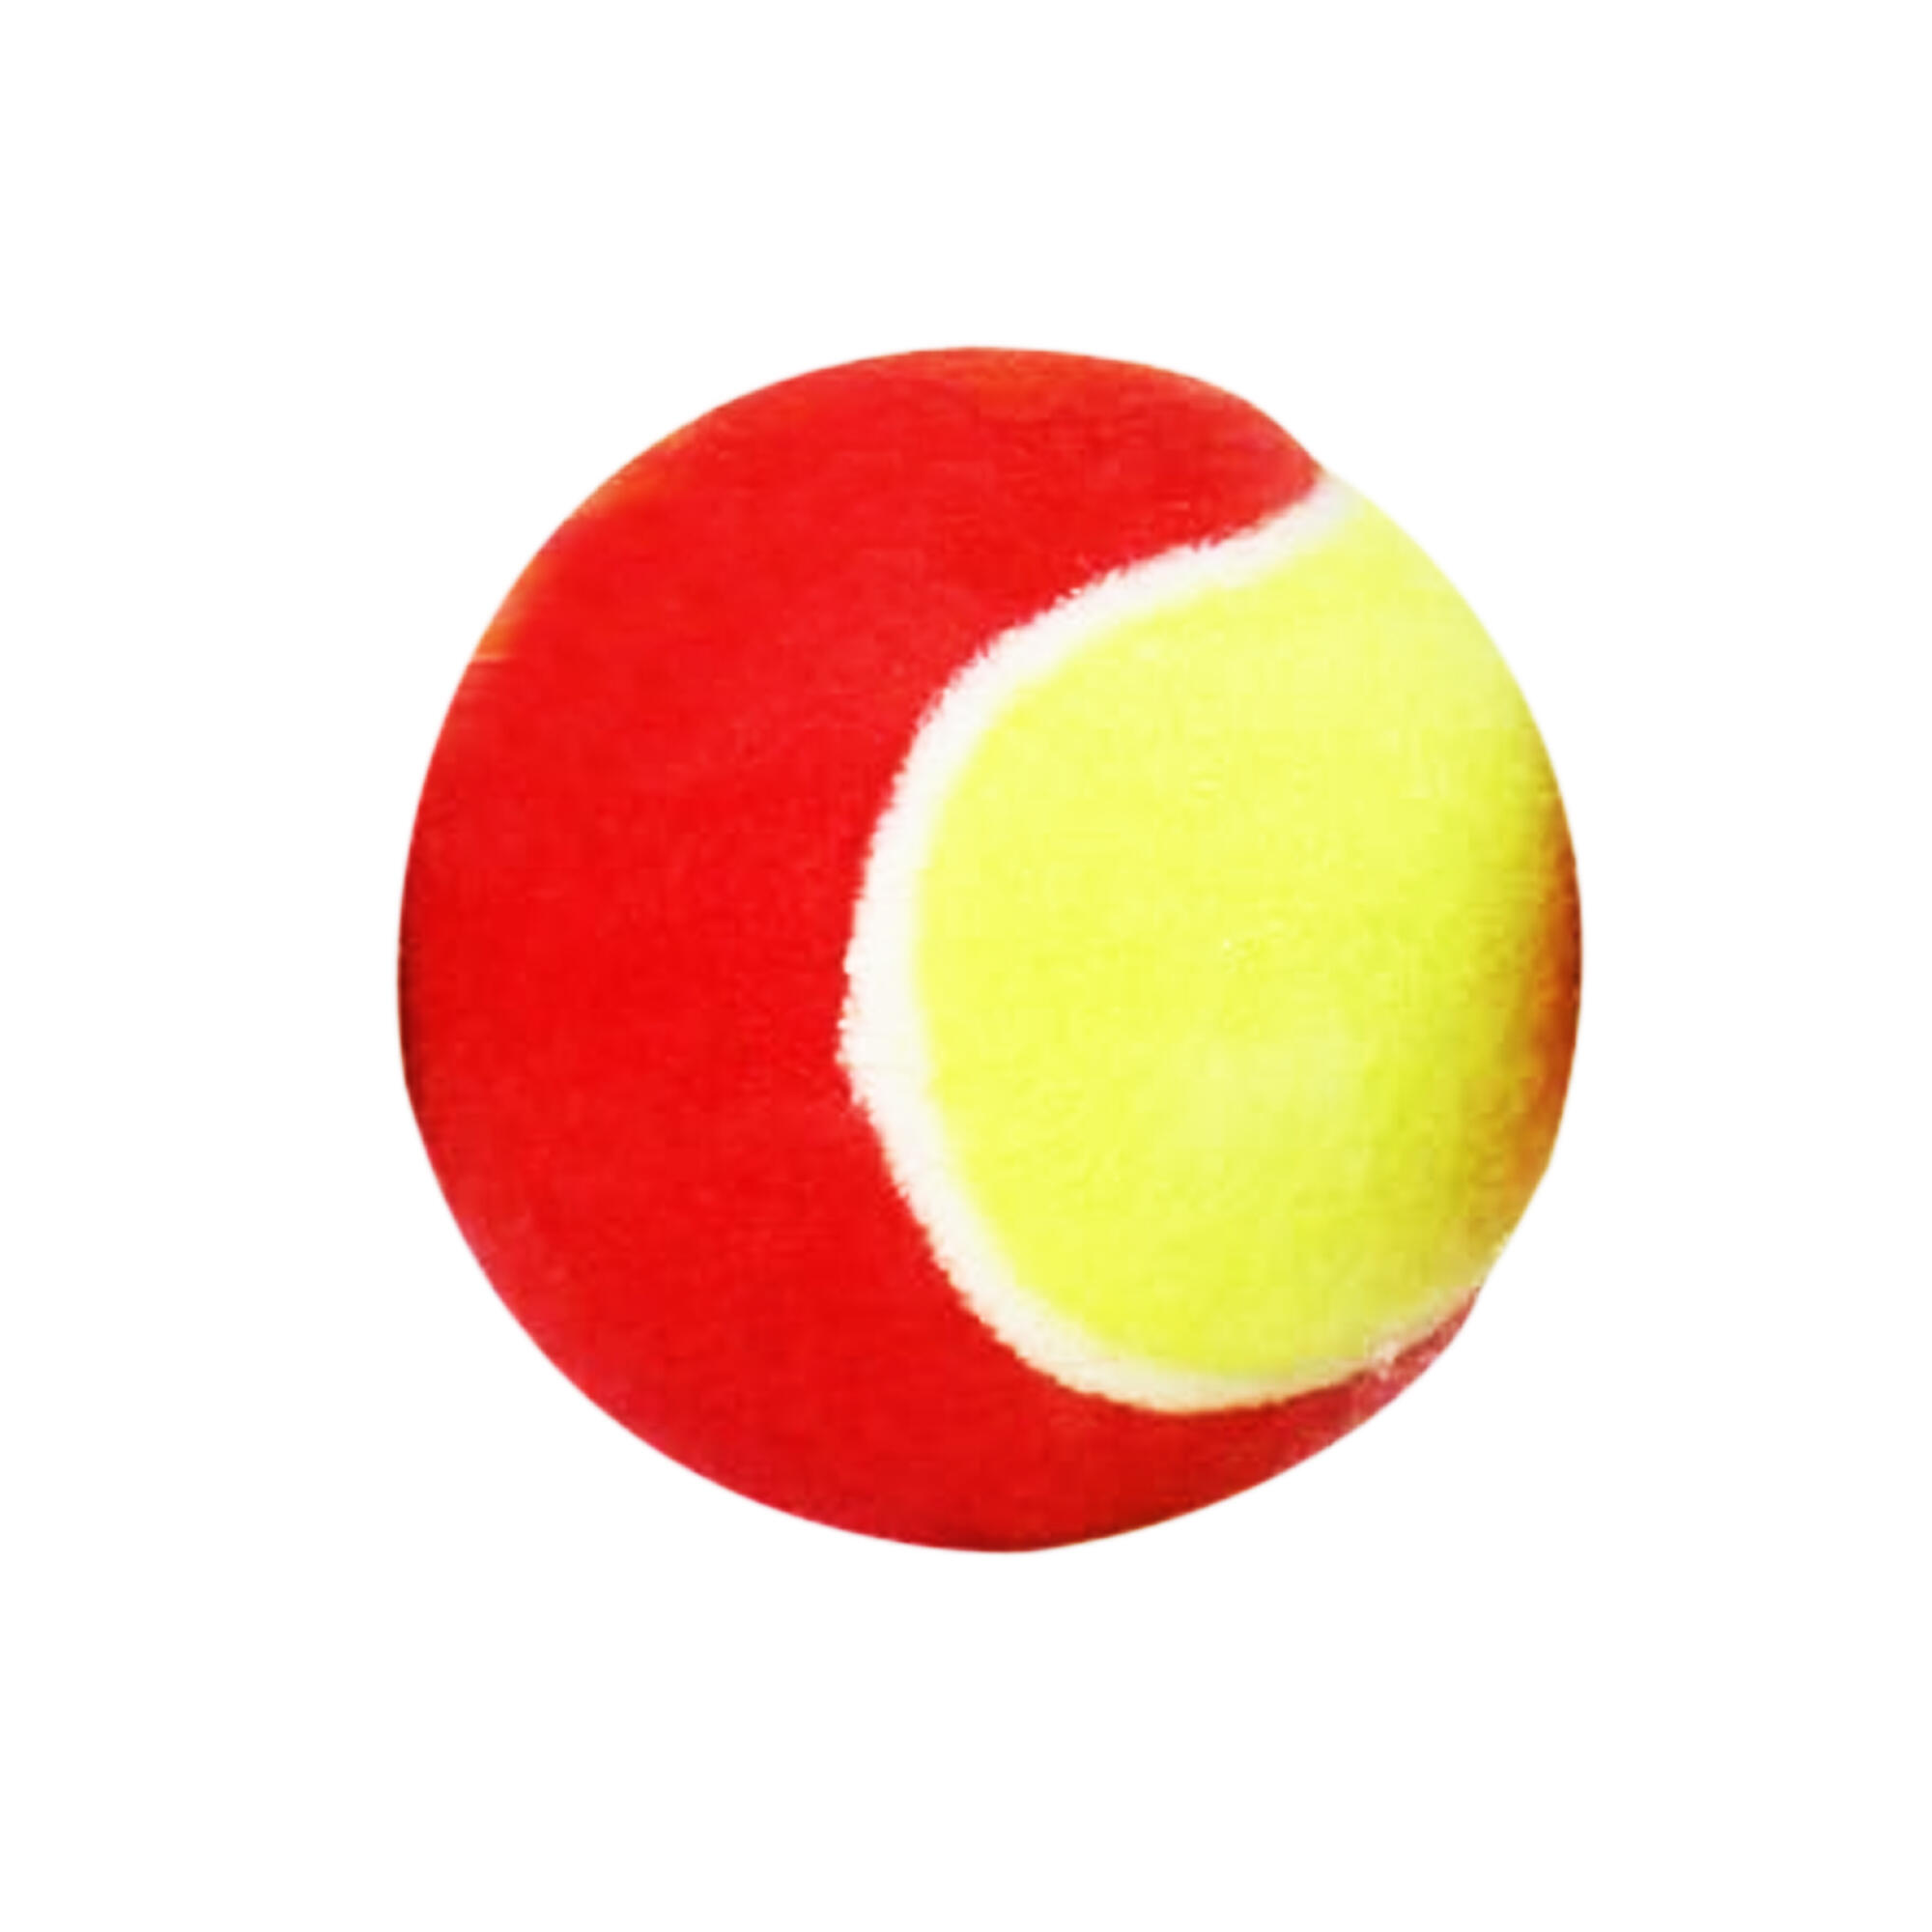 Stage 3 Mini Tennis Balls (Pack of 12) (Red/Yellow) 3/3